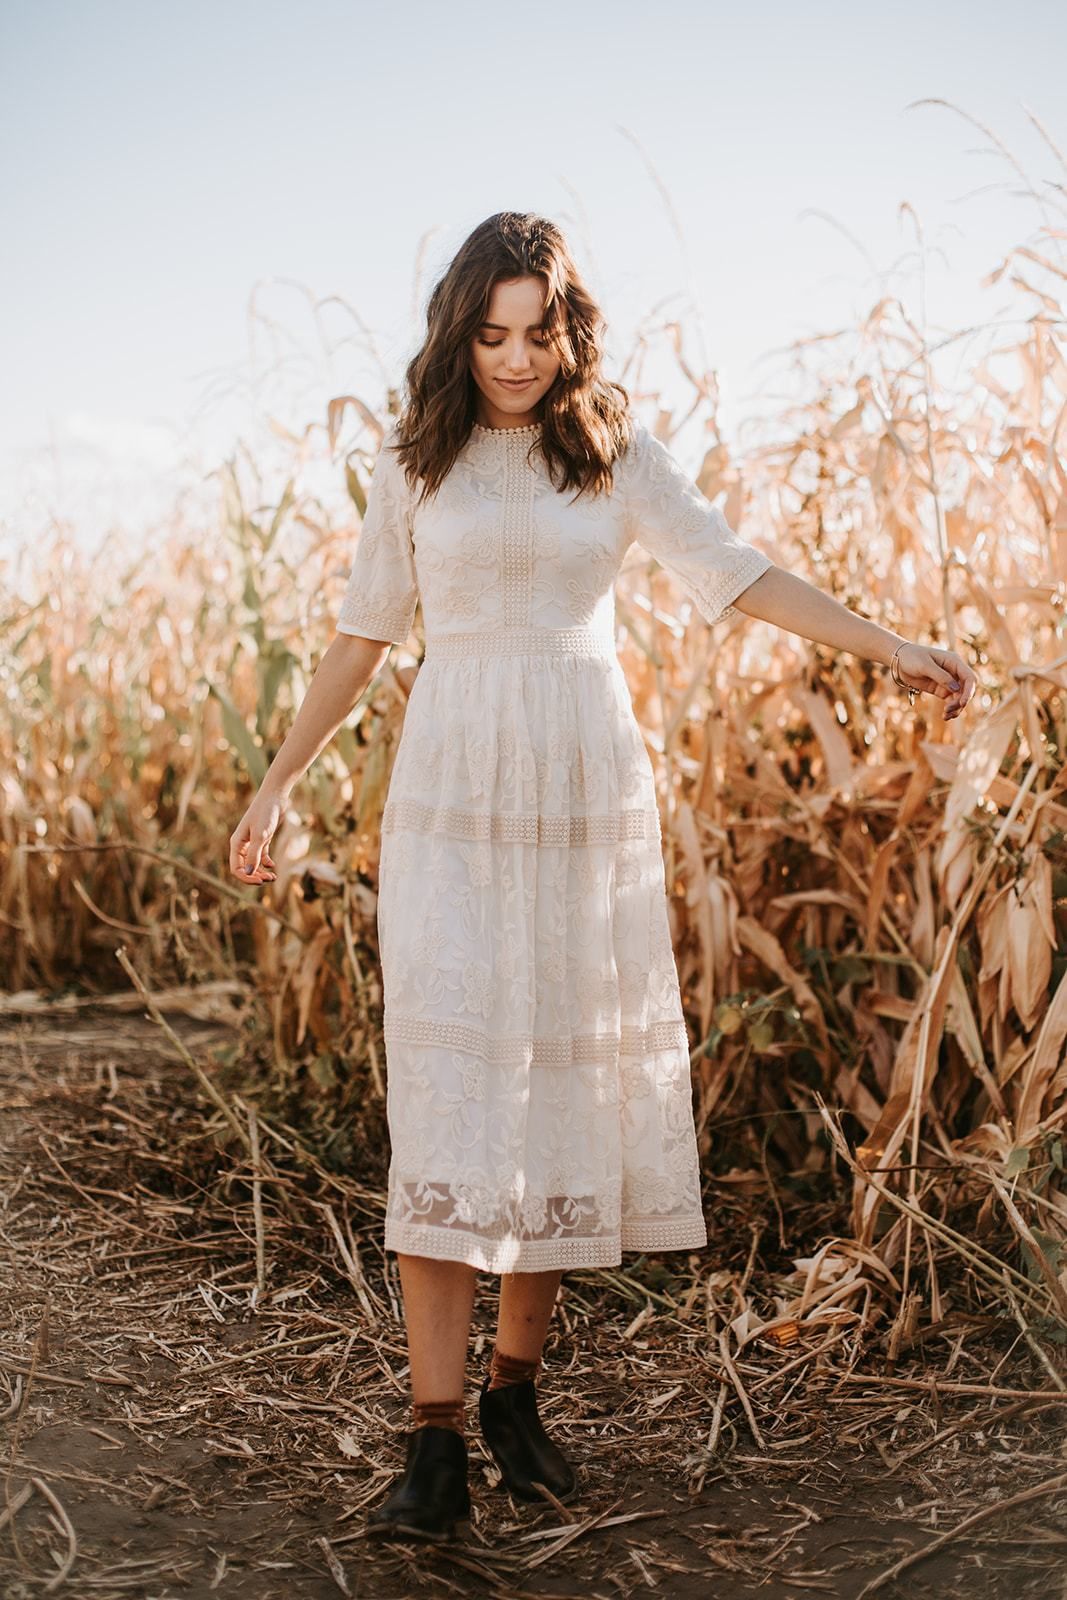 Cream Lace Dress Outfit Ideas